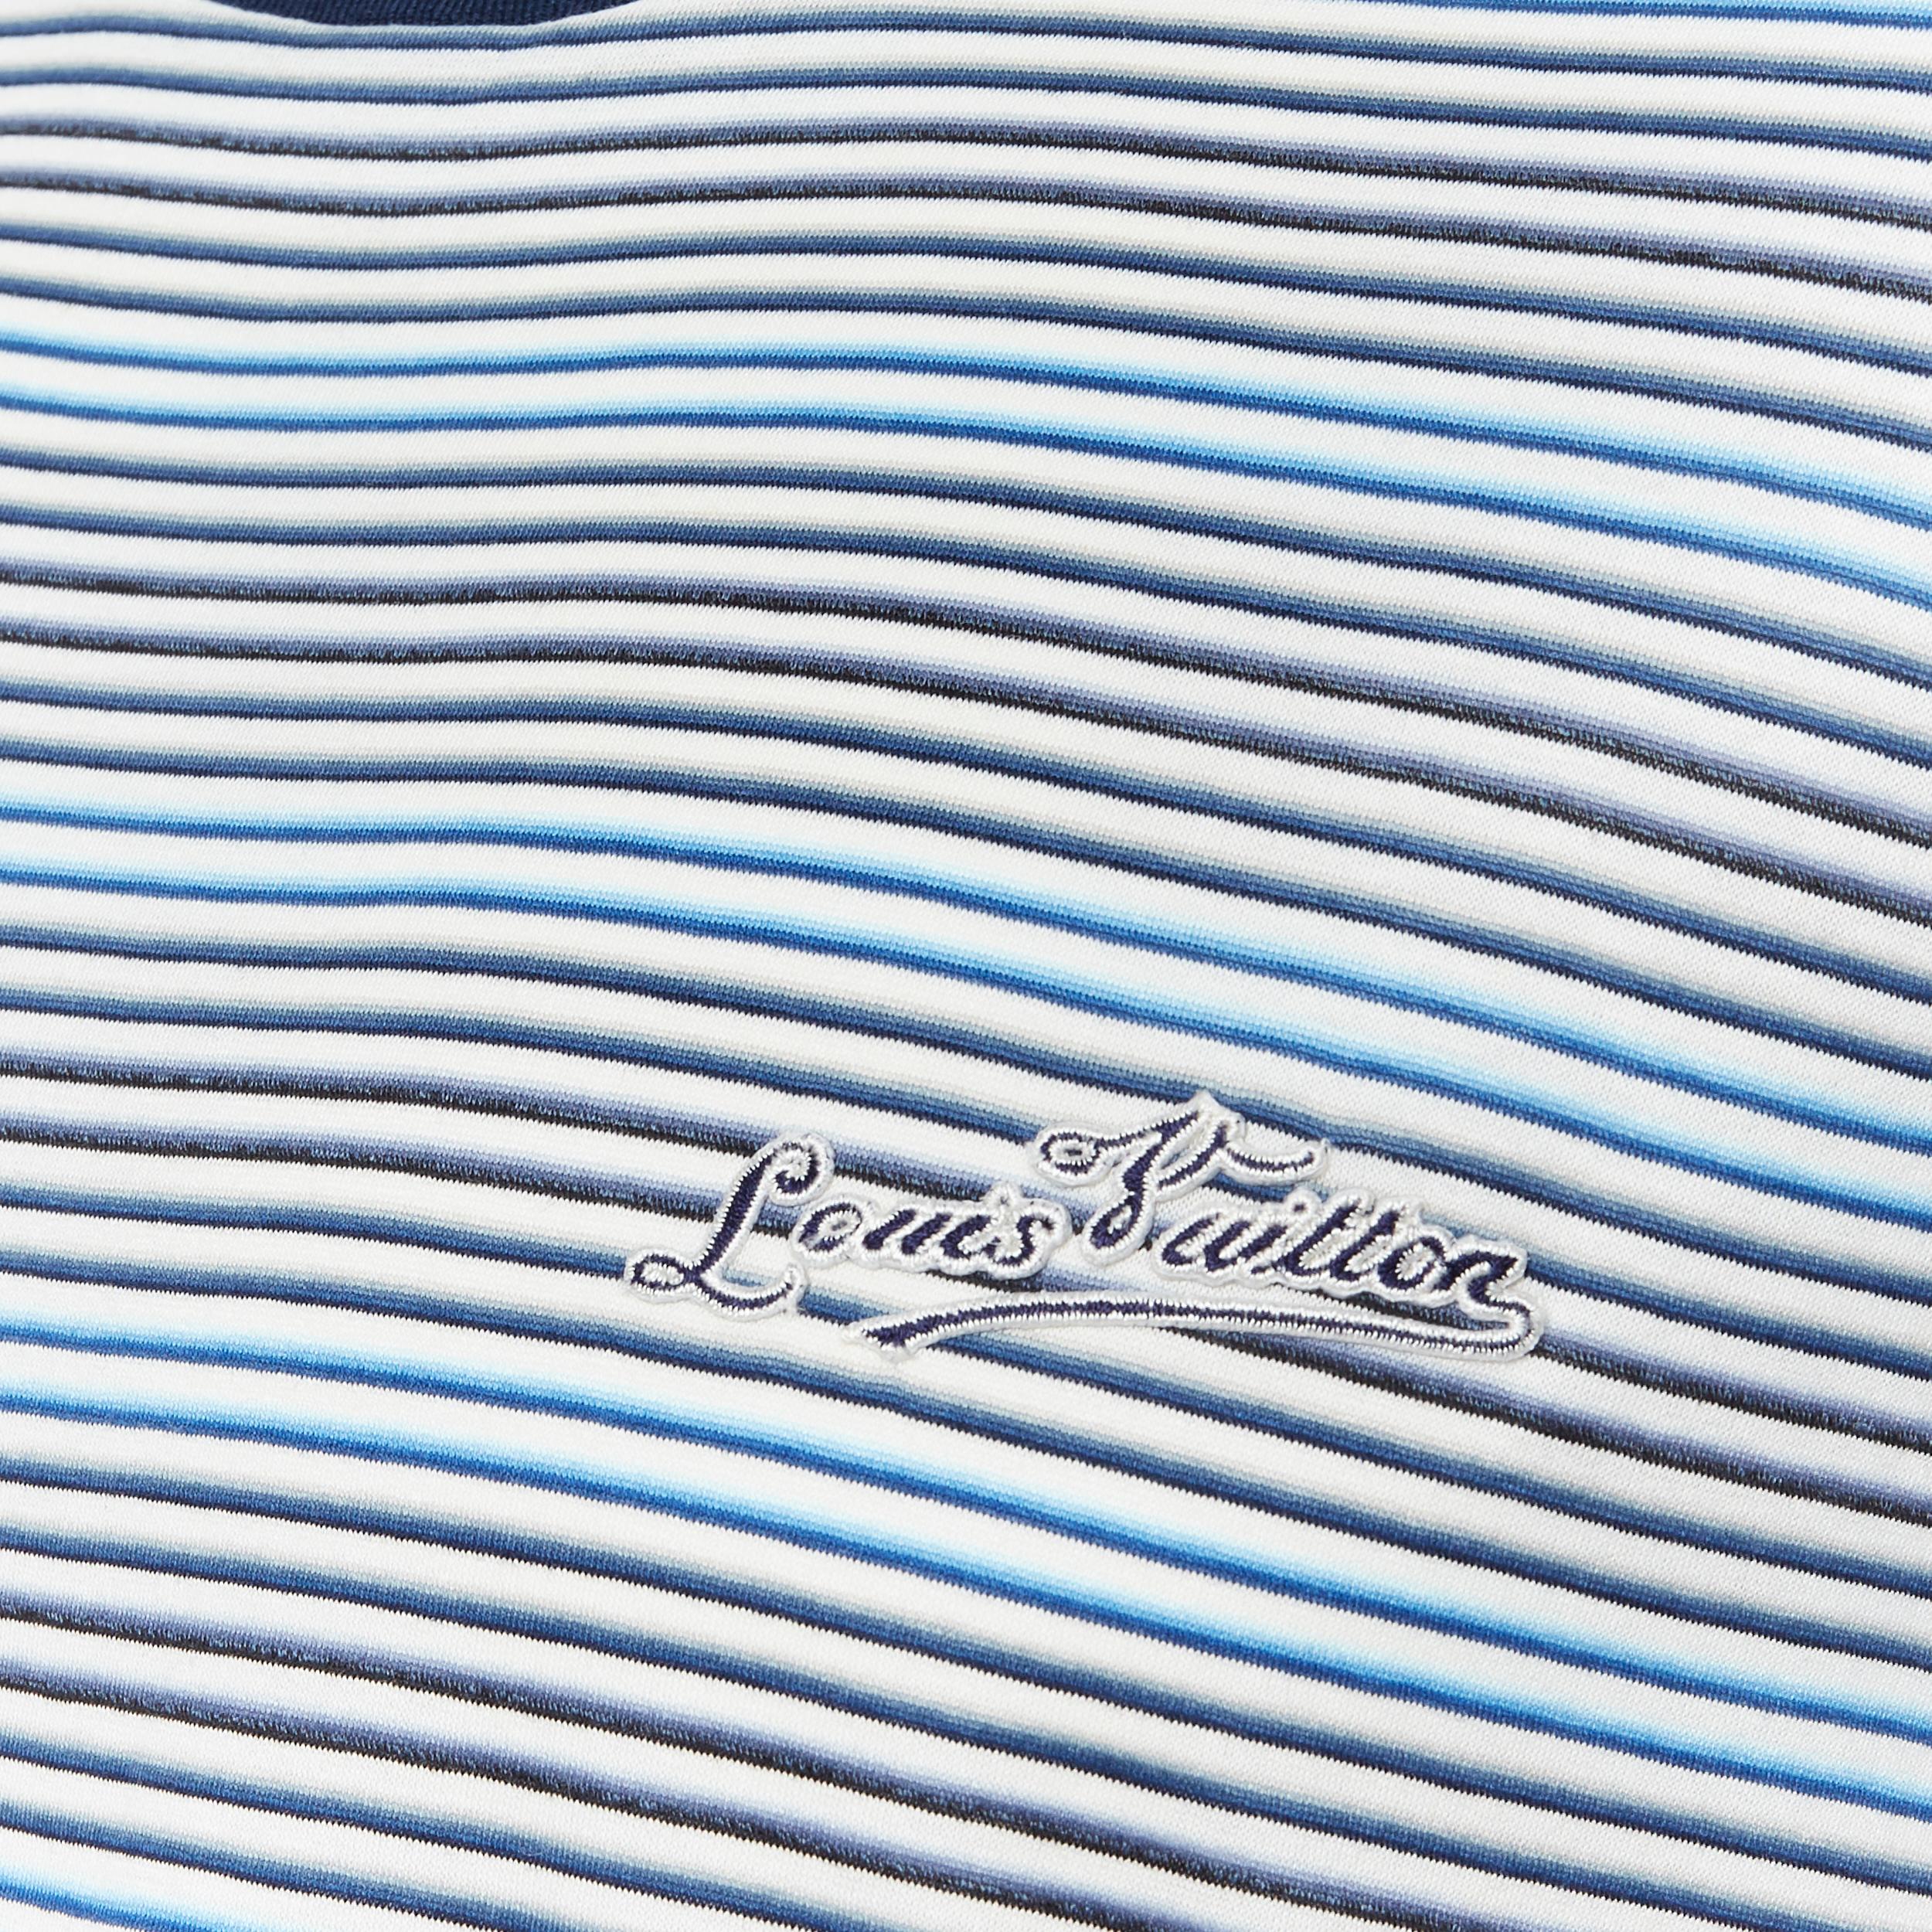 LOUIS VUITTON cotton navy blue stripe embroidered crew short sleeve t-shirt M
Brand: Louis Vuitton
Designer: Marc Jacobs
Model Name / Style: T-shirt
Material: Cotton
Color: Navy
Pattern: Striped
Extra Detail: Short sleeve. Crew neck neckline.
Made